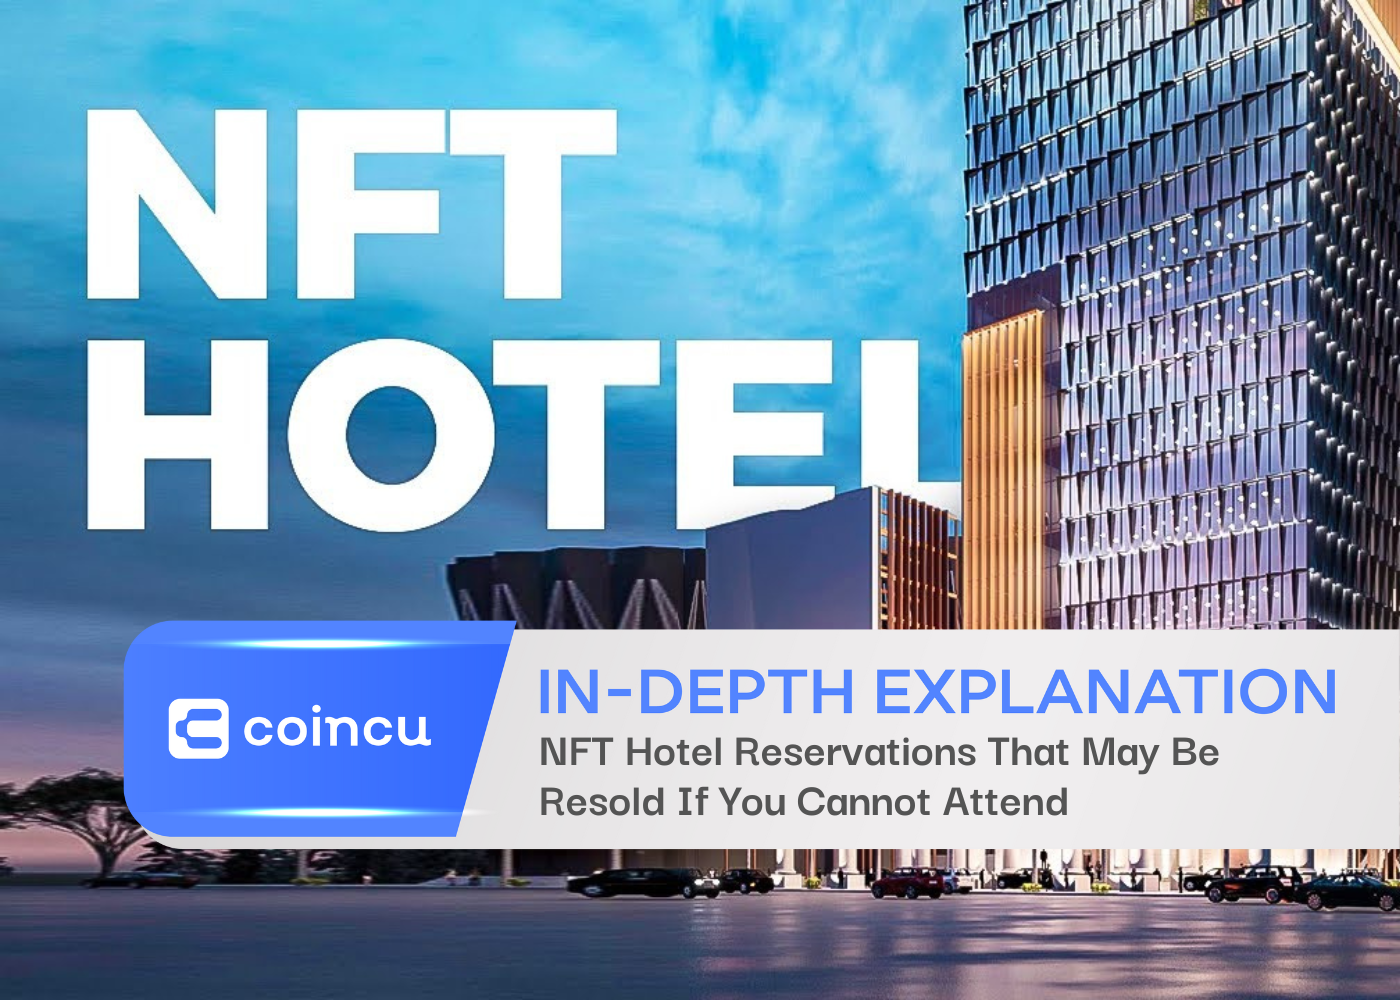 NFT Hotel Reservations That May Be